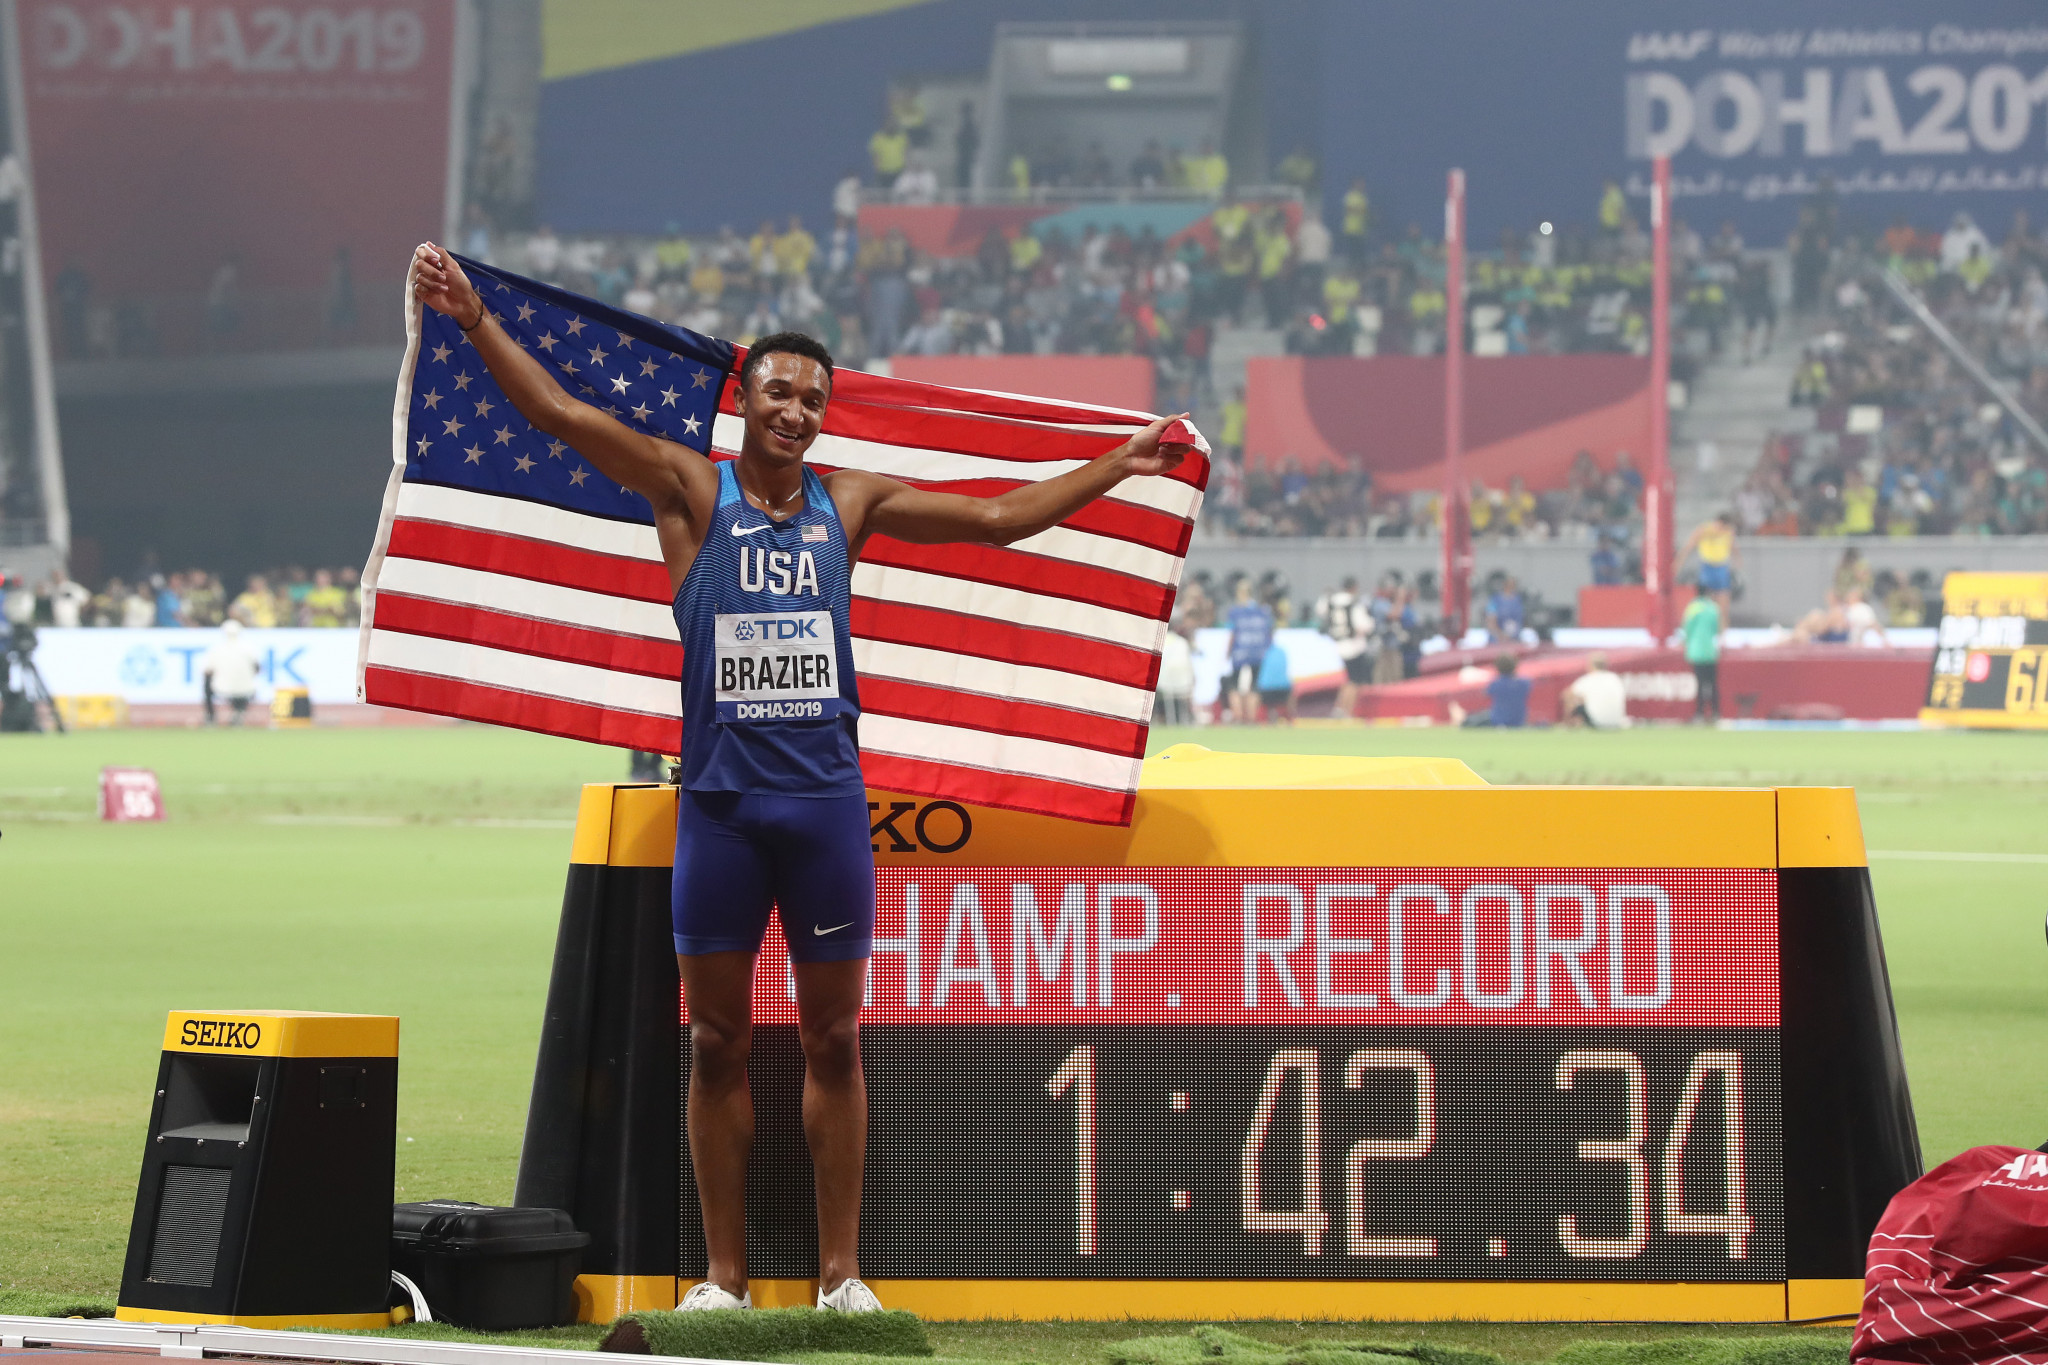 Donavan Brazier of the United States, based at the Nike Oregon Project, won the men's world 800m title in a Championship record tonight ©Getty Images